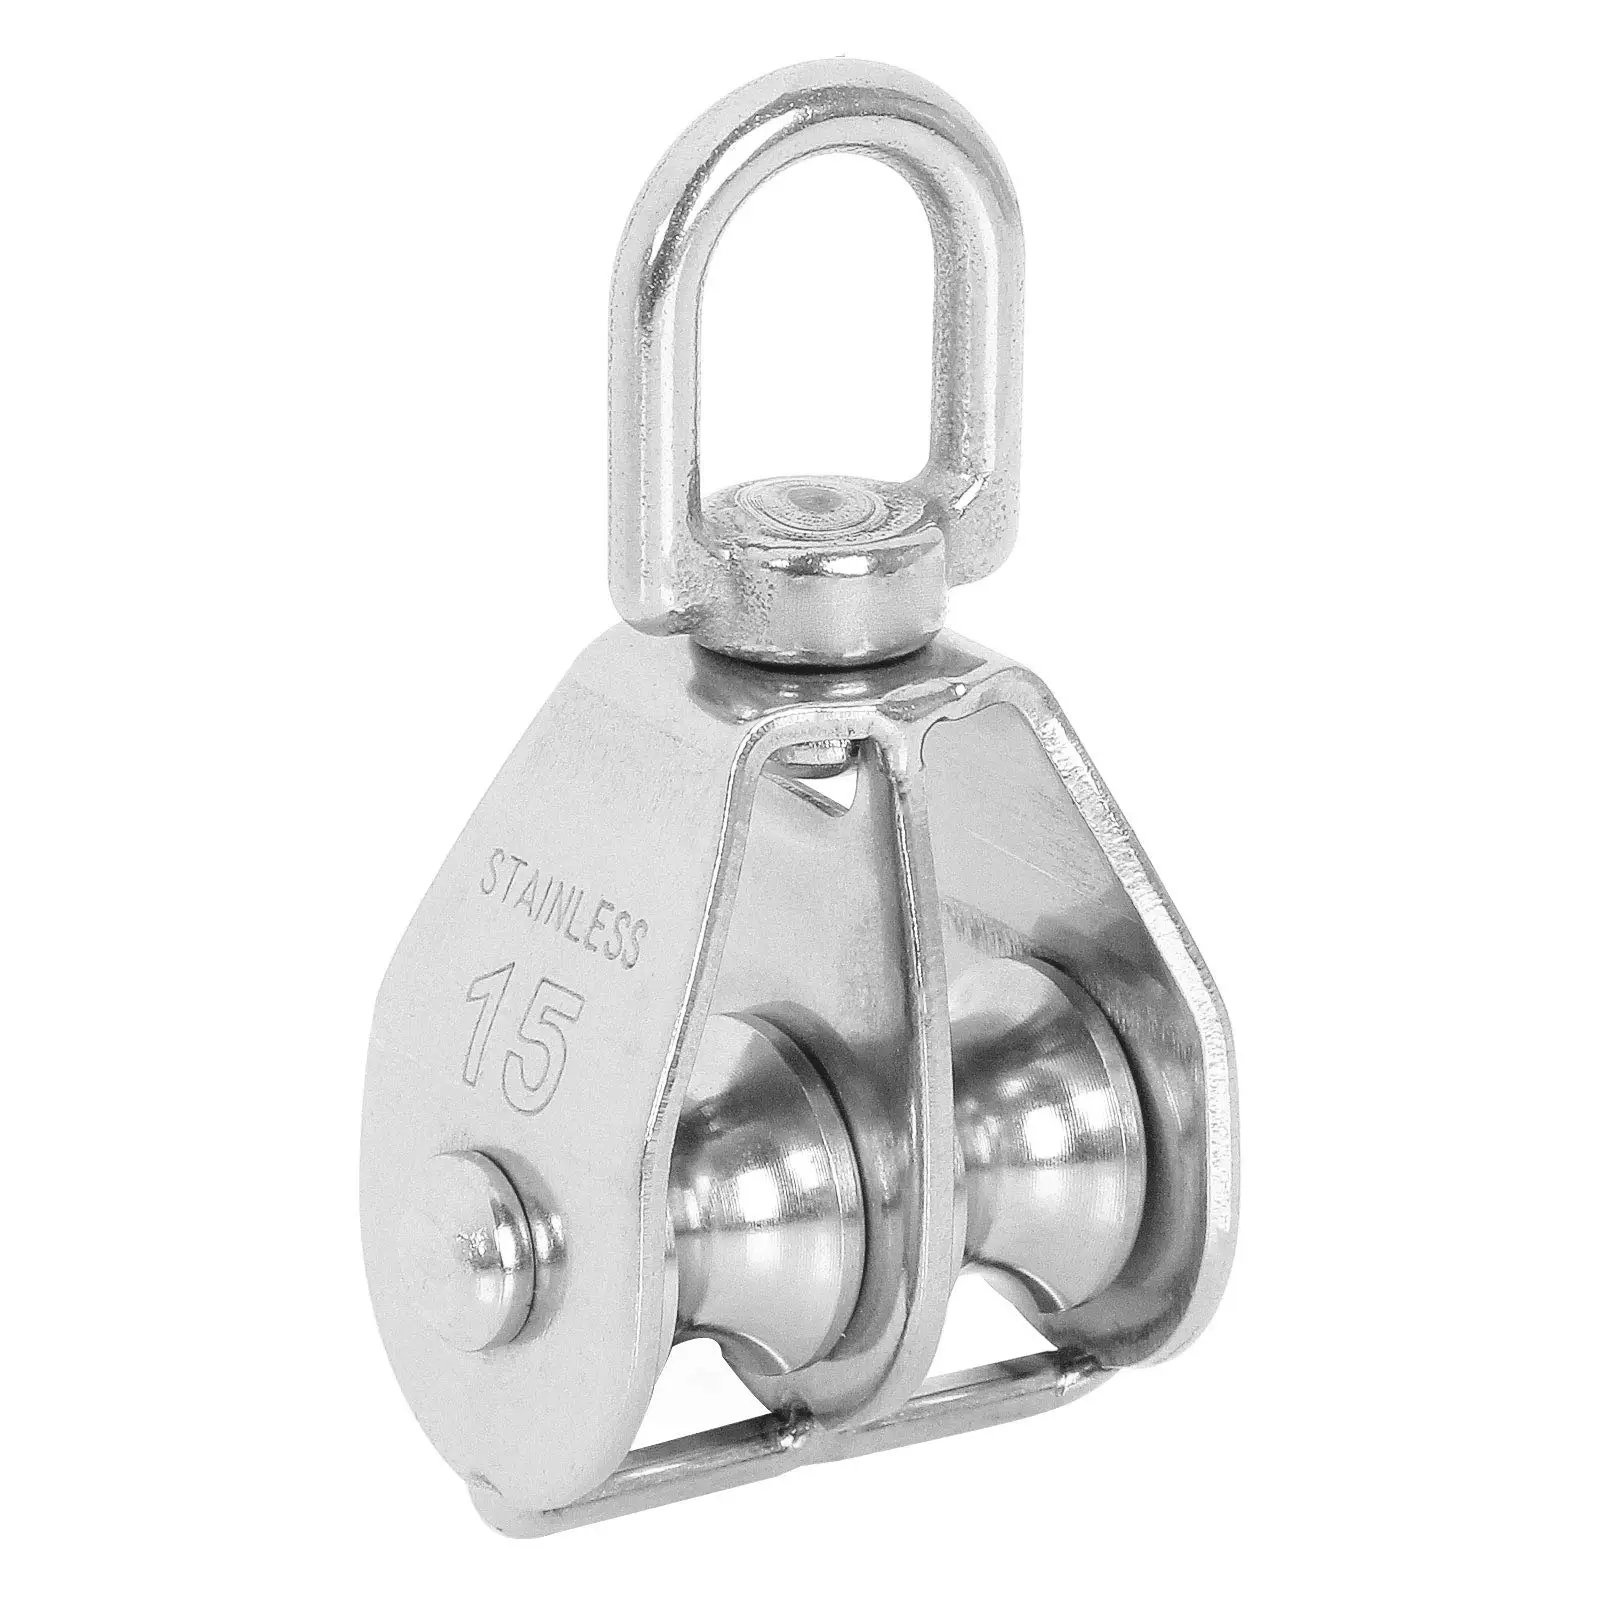 Double Pulley Block Hanging Wire Pulley Roller 304 Stainless Steel Heavy Duty Double Wheel Block Pulley for Lifting Rope (M15) 1 pack m15 lifting double pulley block stainless steel heavy duty crane swivel hook double pulley roller